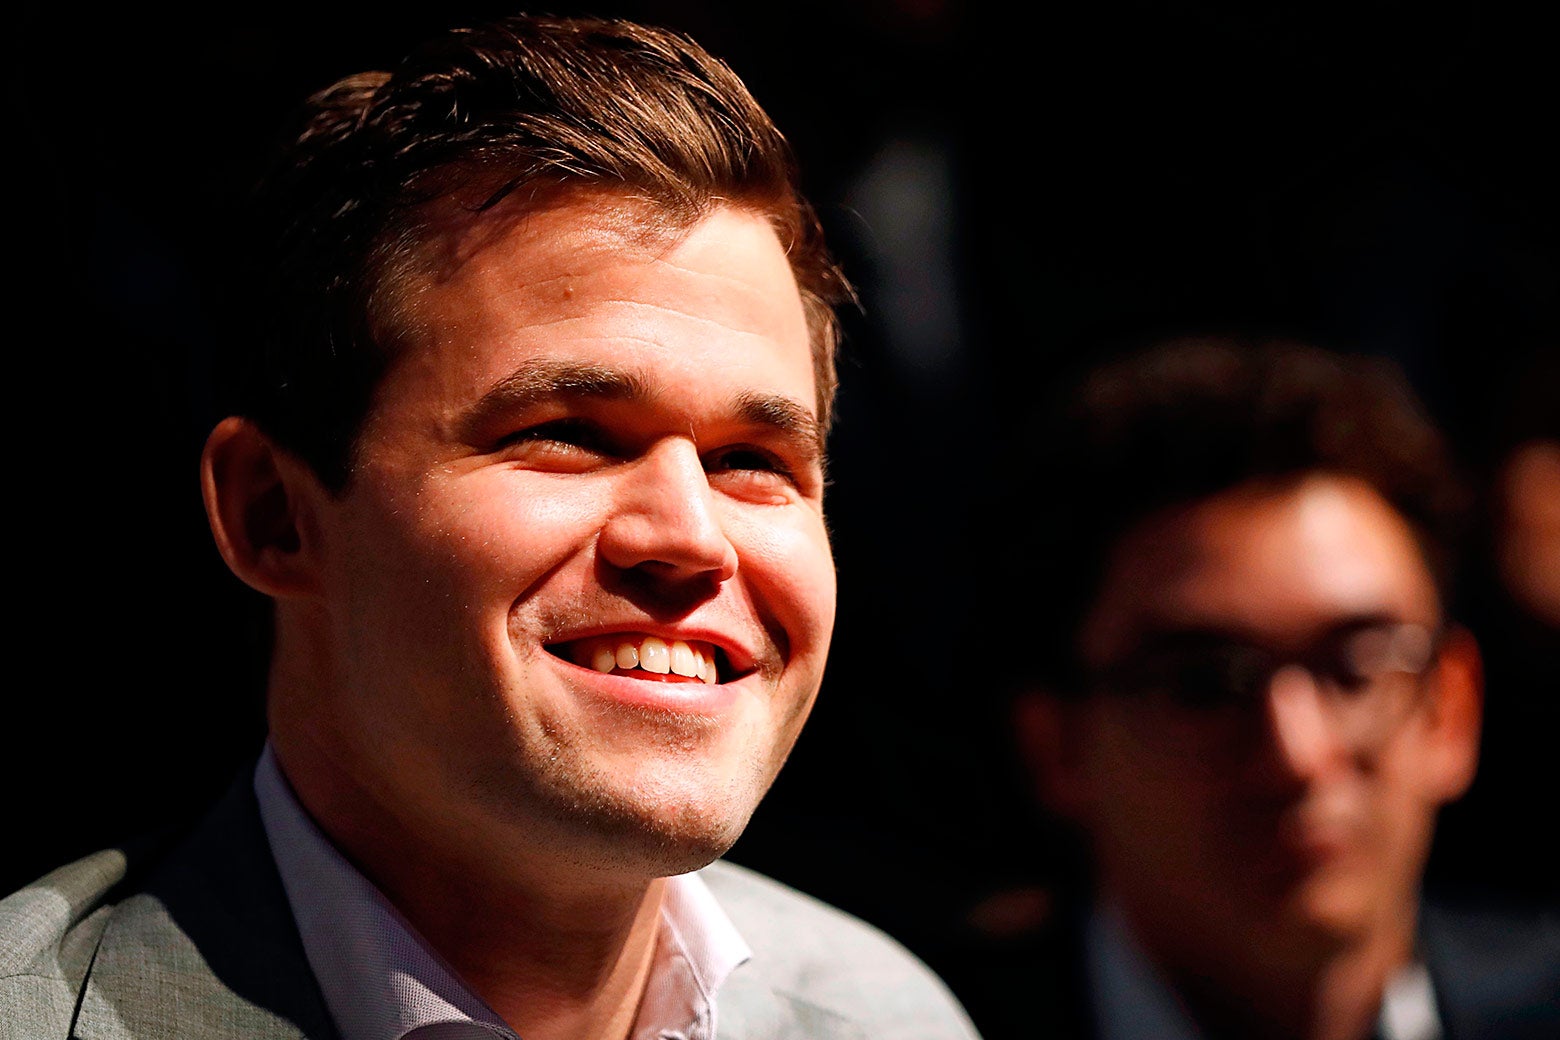 Magnus Carlsen smiles during a press conference after his victory over Fabiano Caruana.